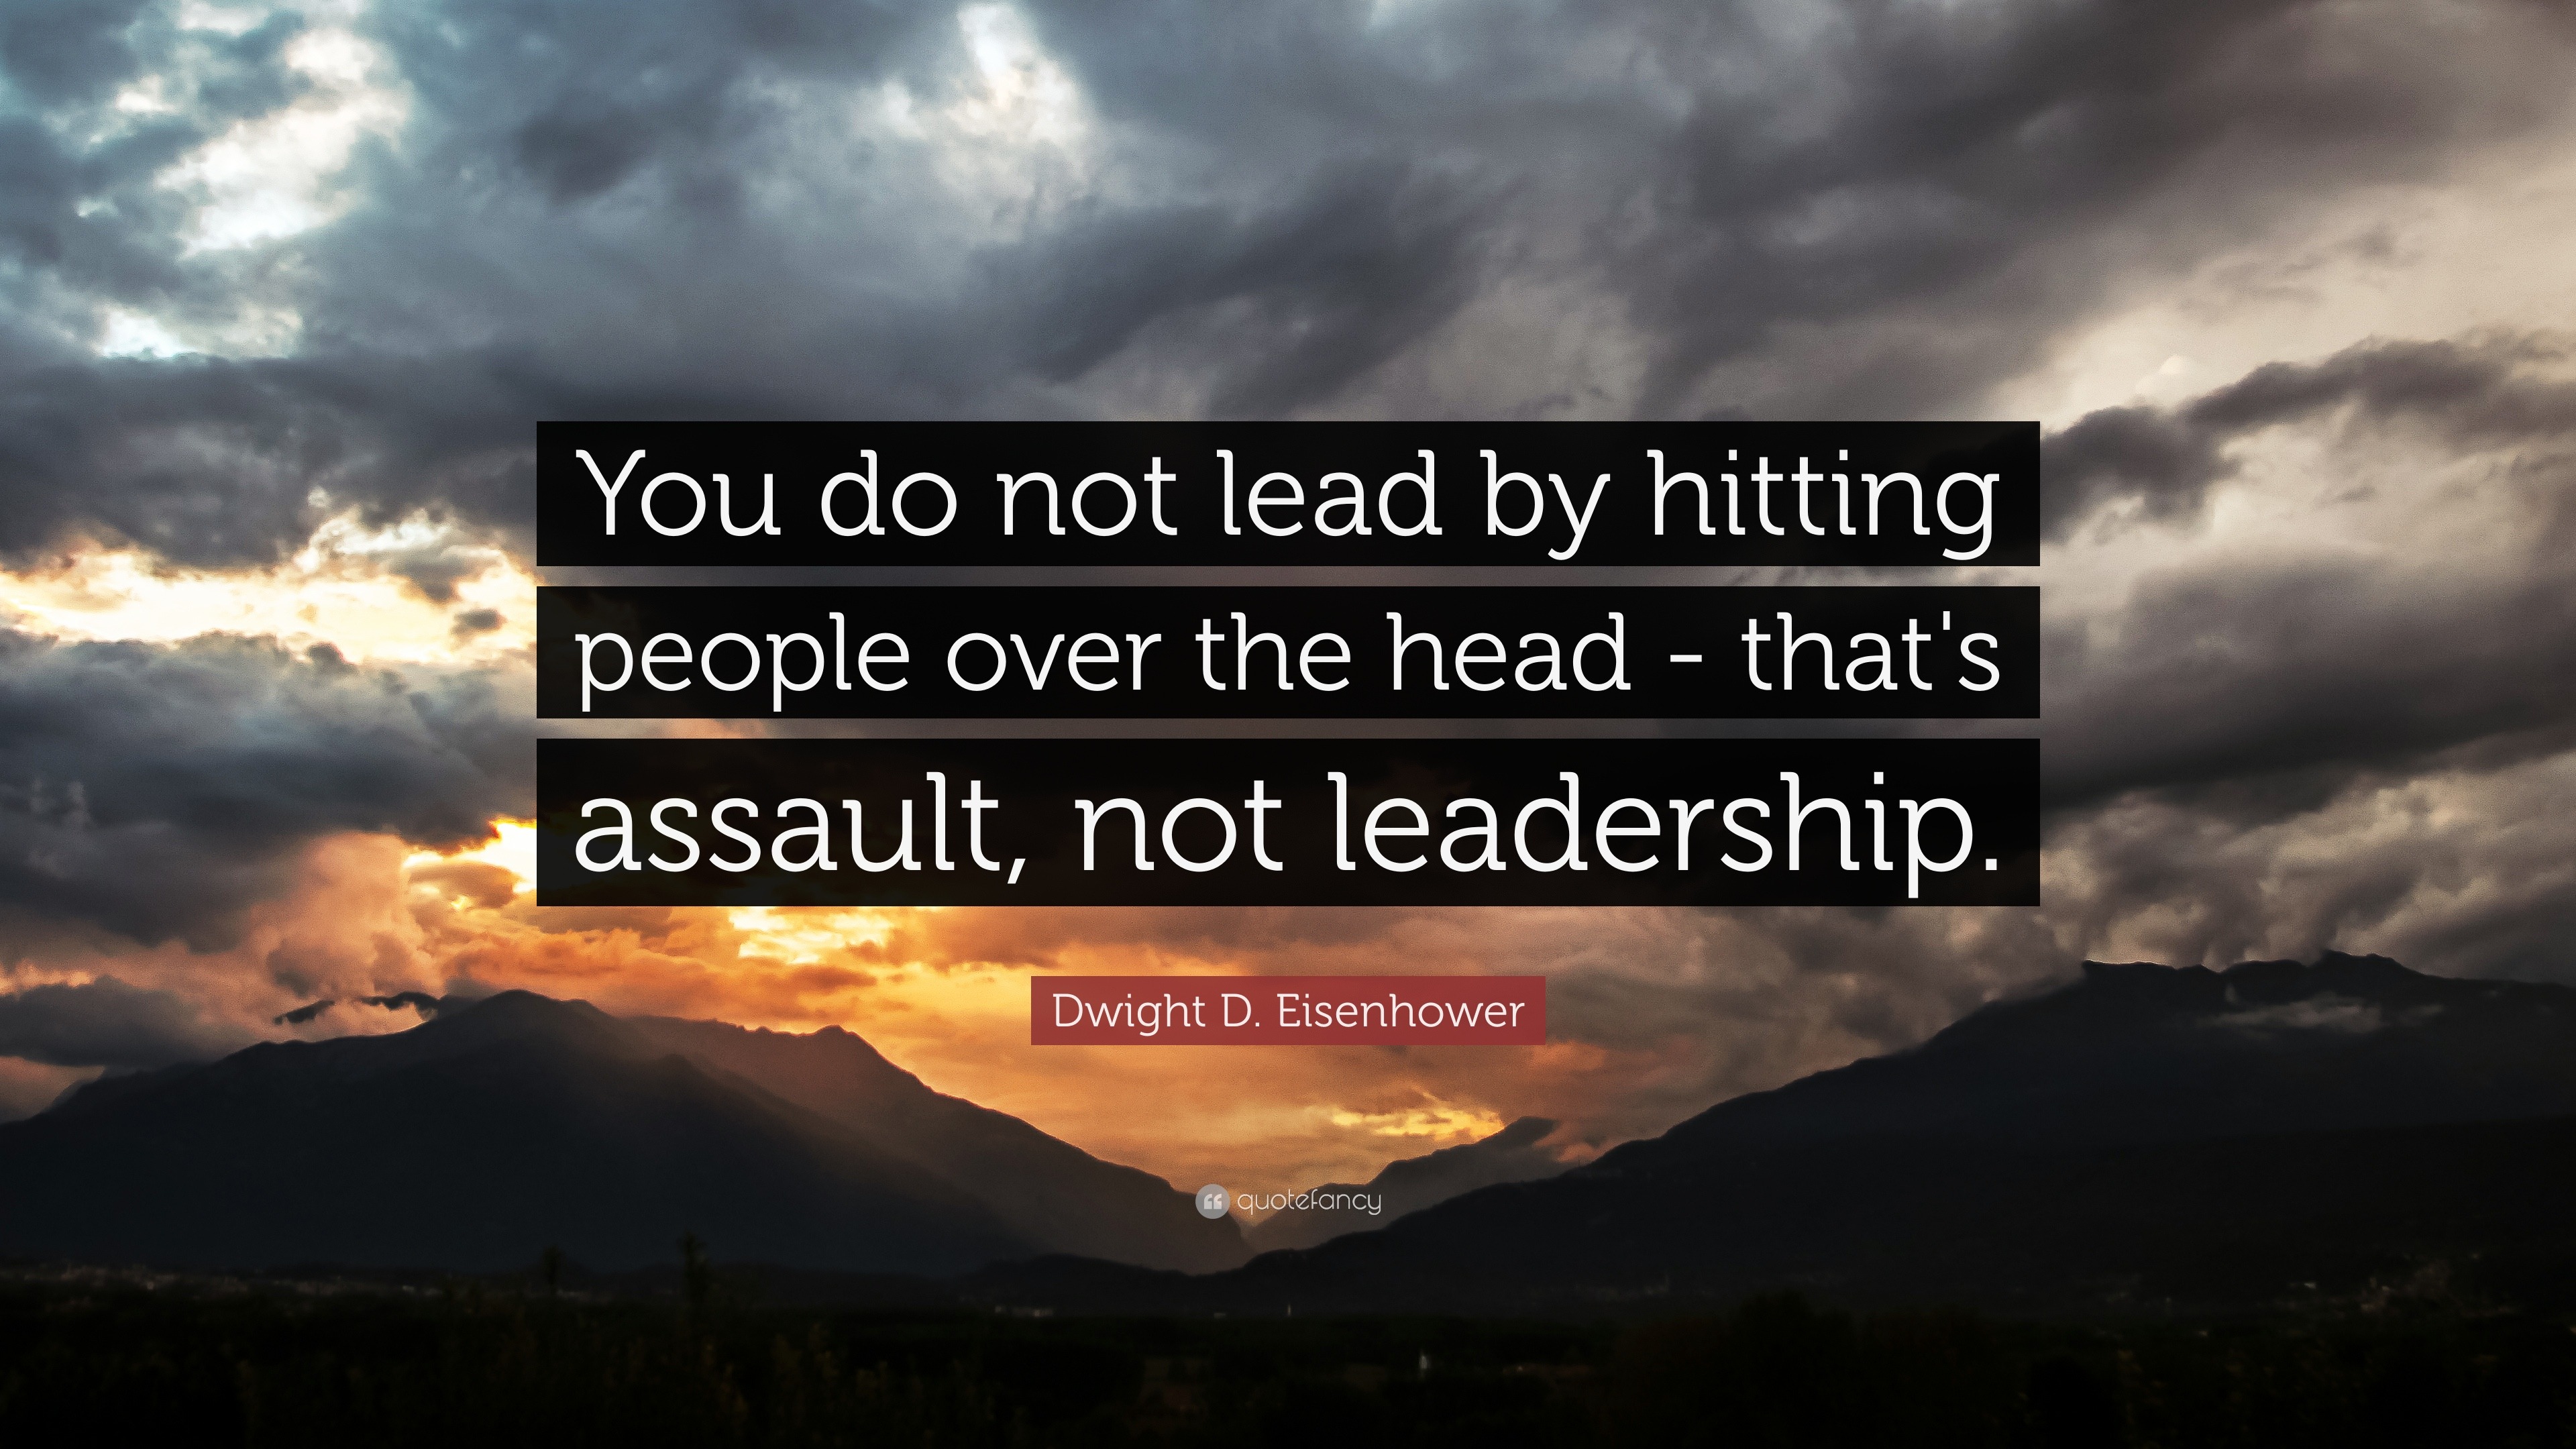 Leadership Quotes “You do not lead by hitting people over the head – that s